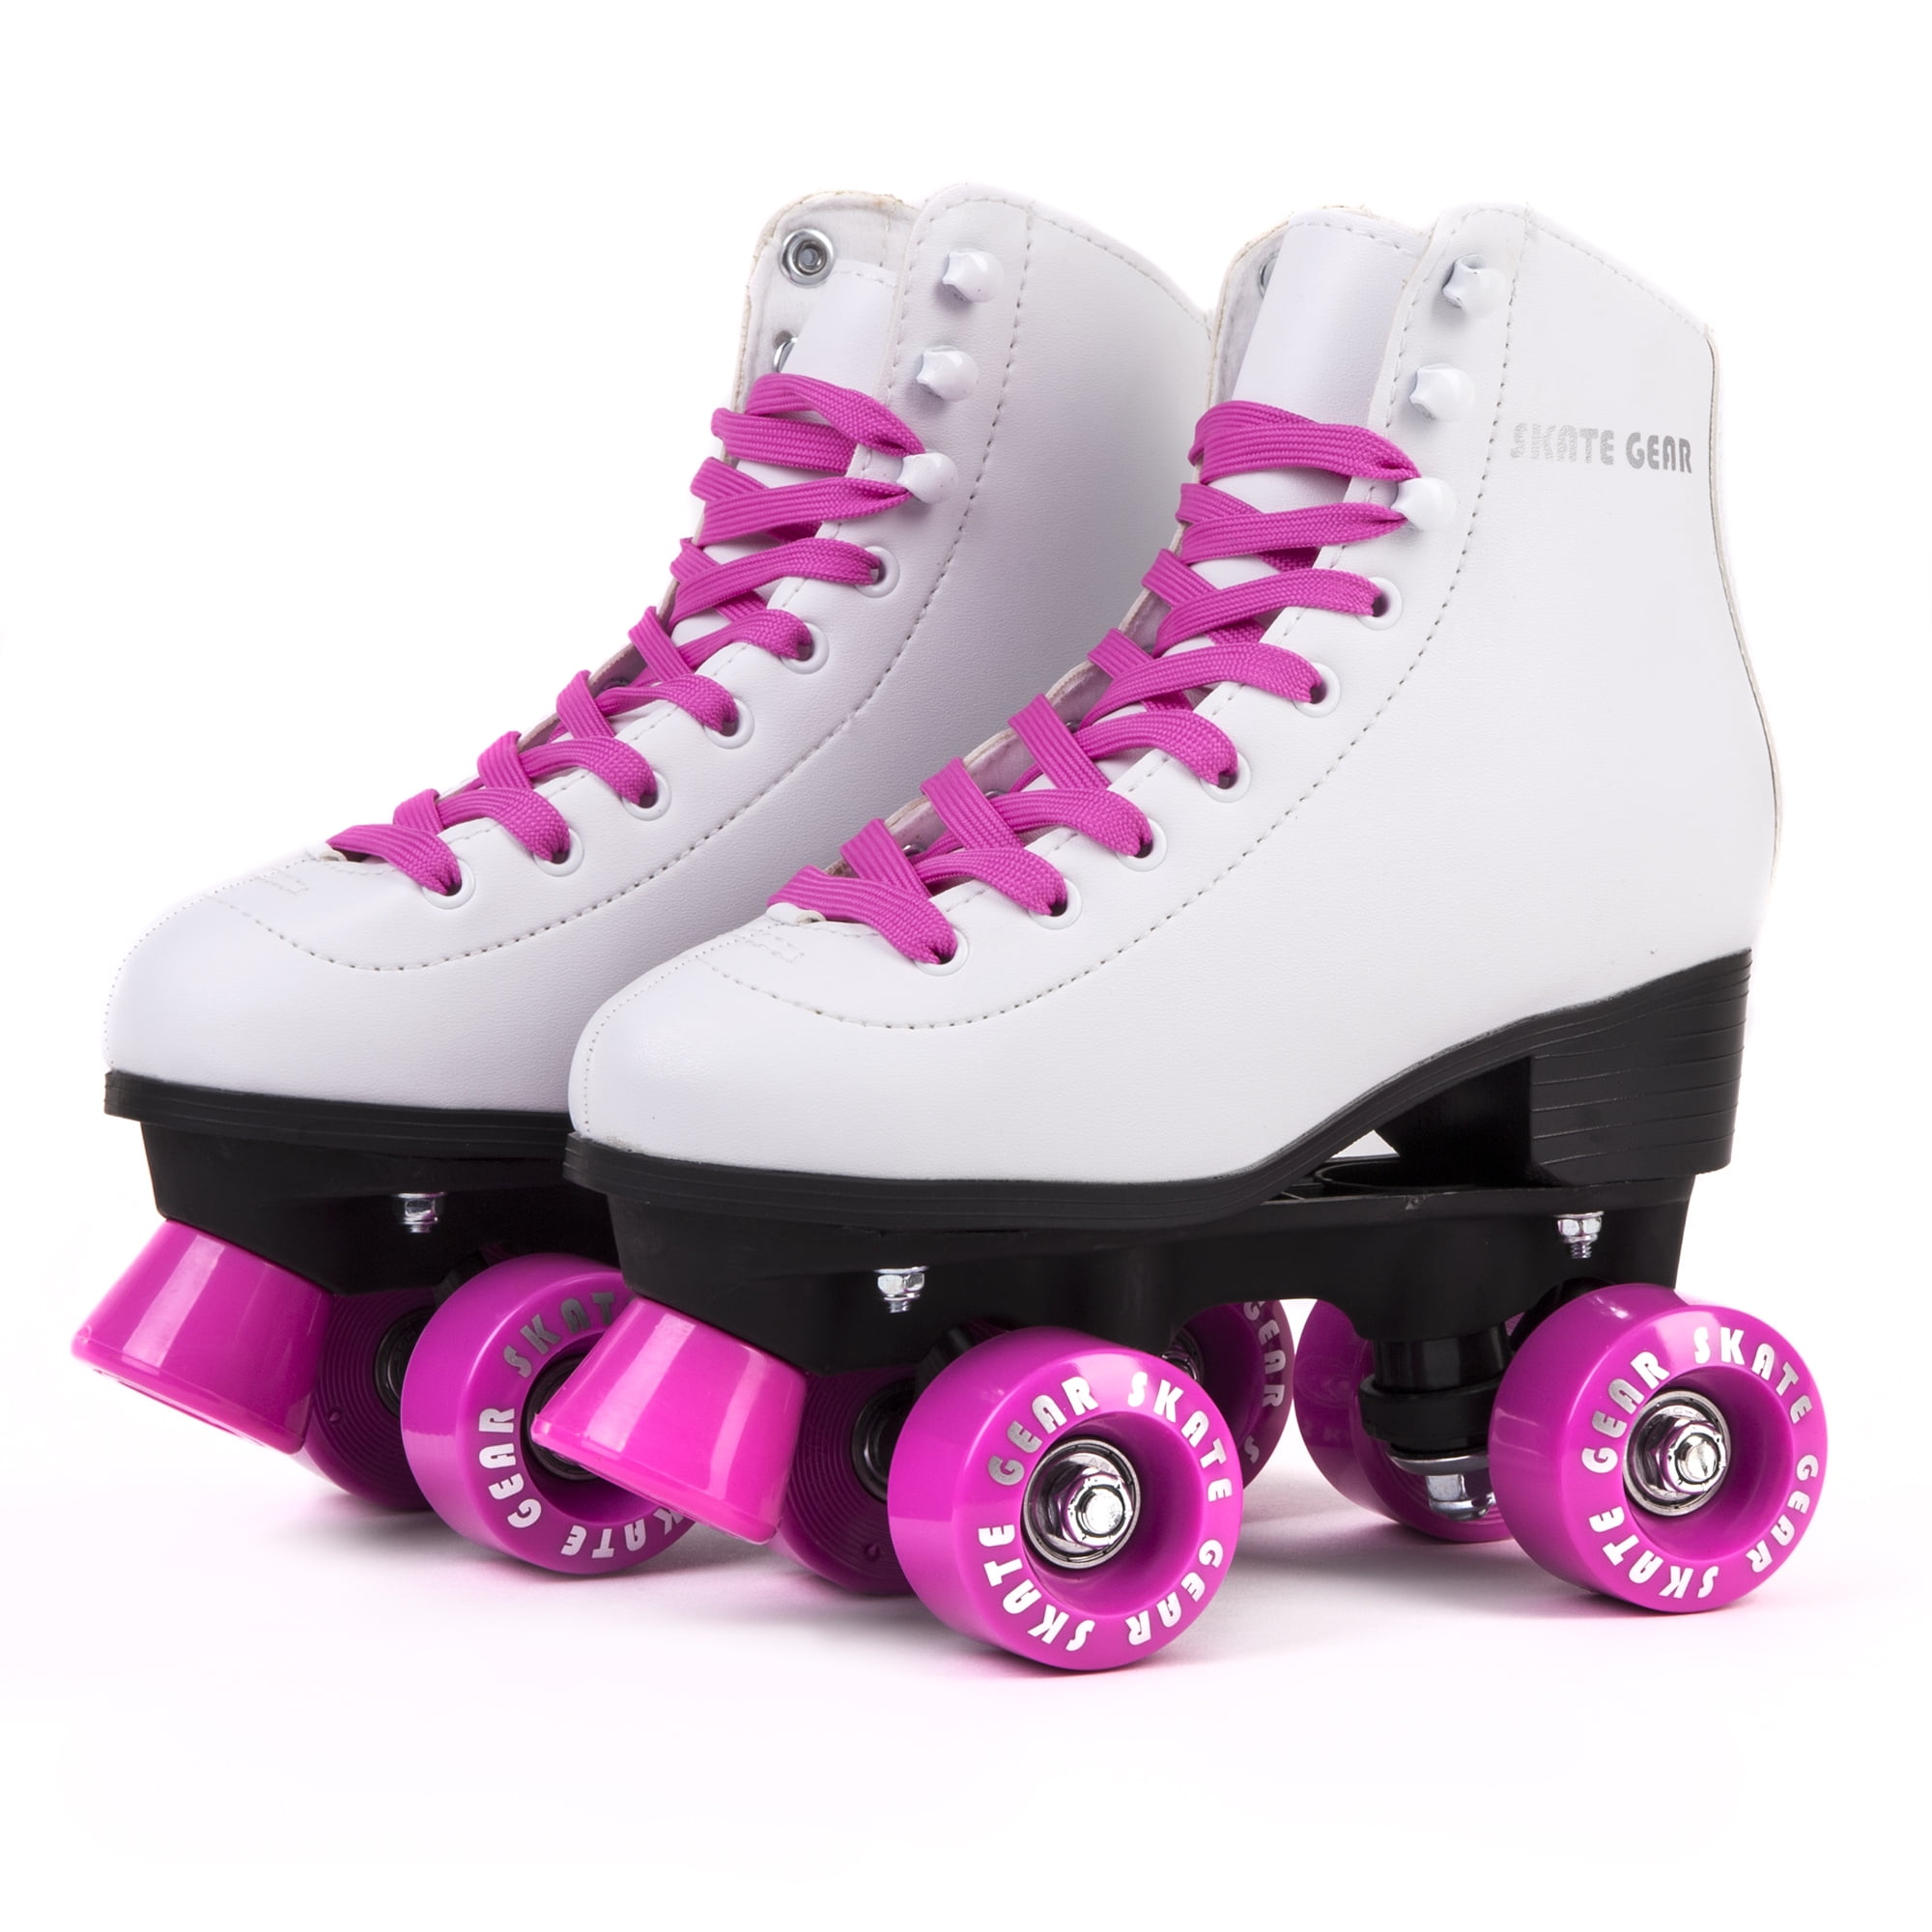 Christmas and Holiday Gifts for Girls Skate Gear Soft Cute Roller Skates 